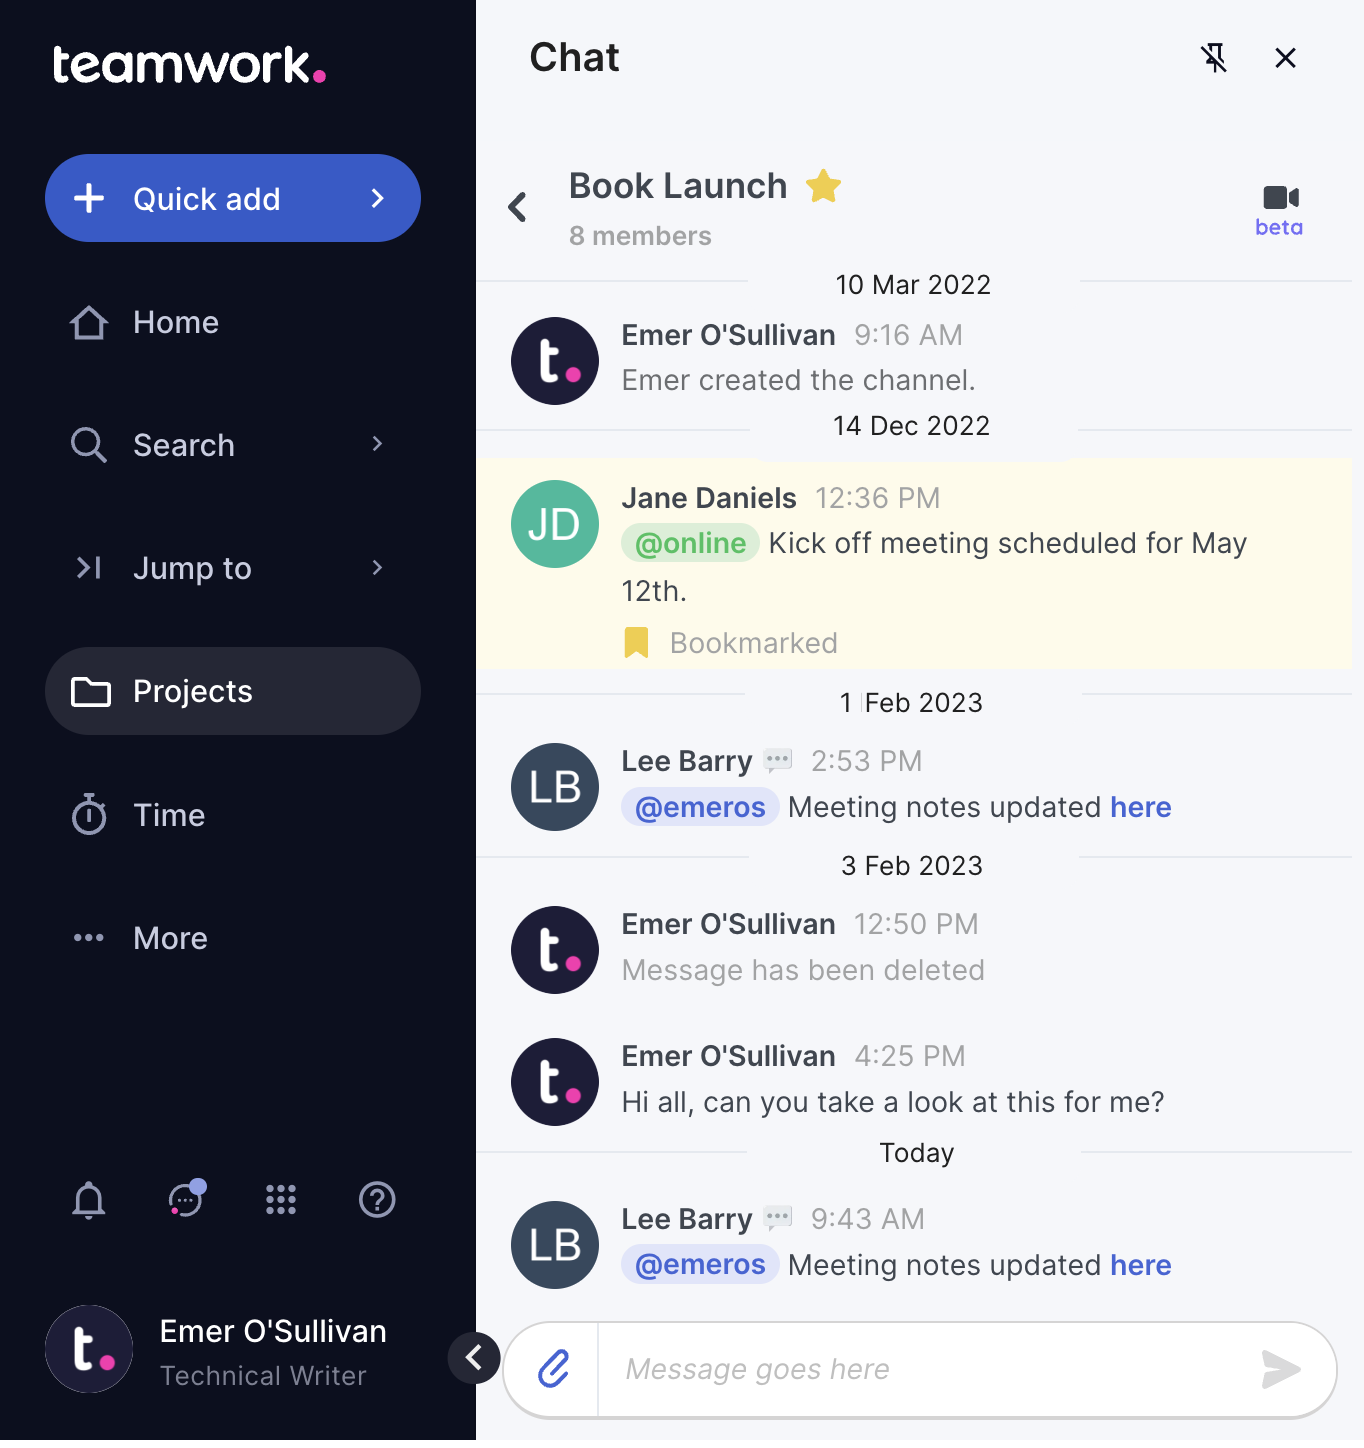 Teamwork’s integrated chat capabilities